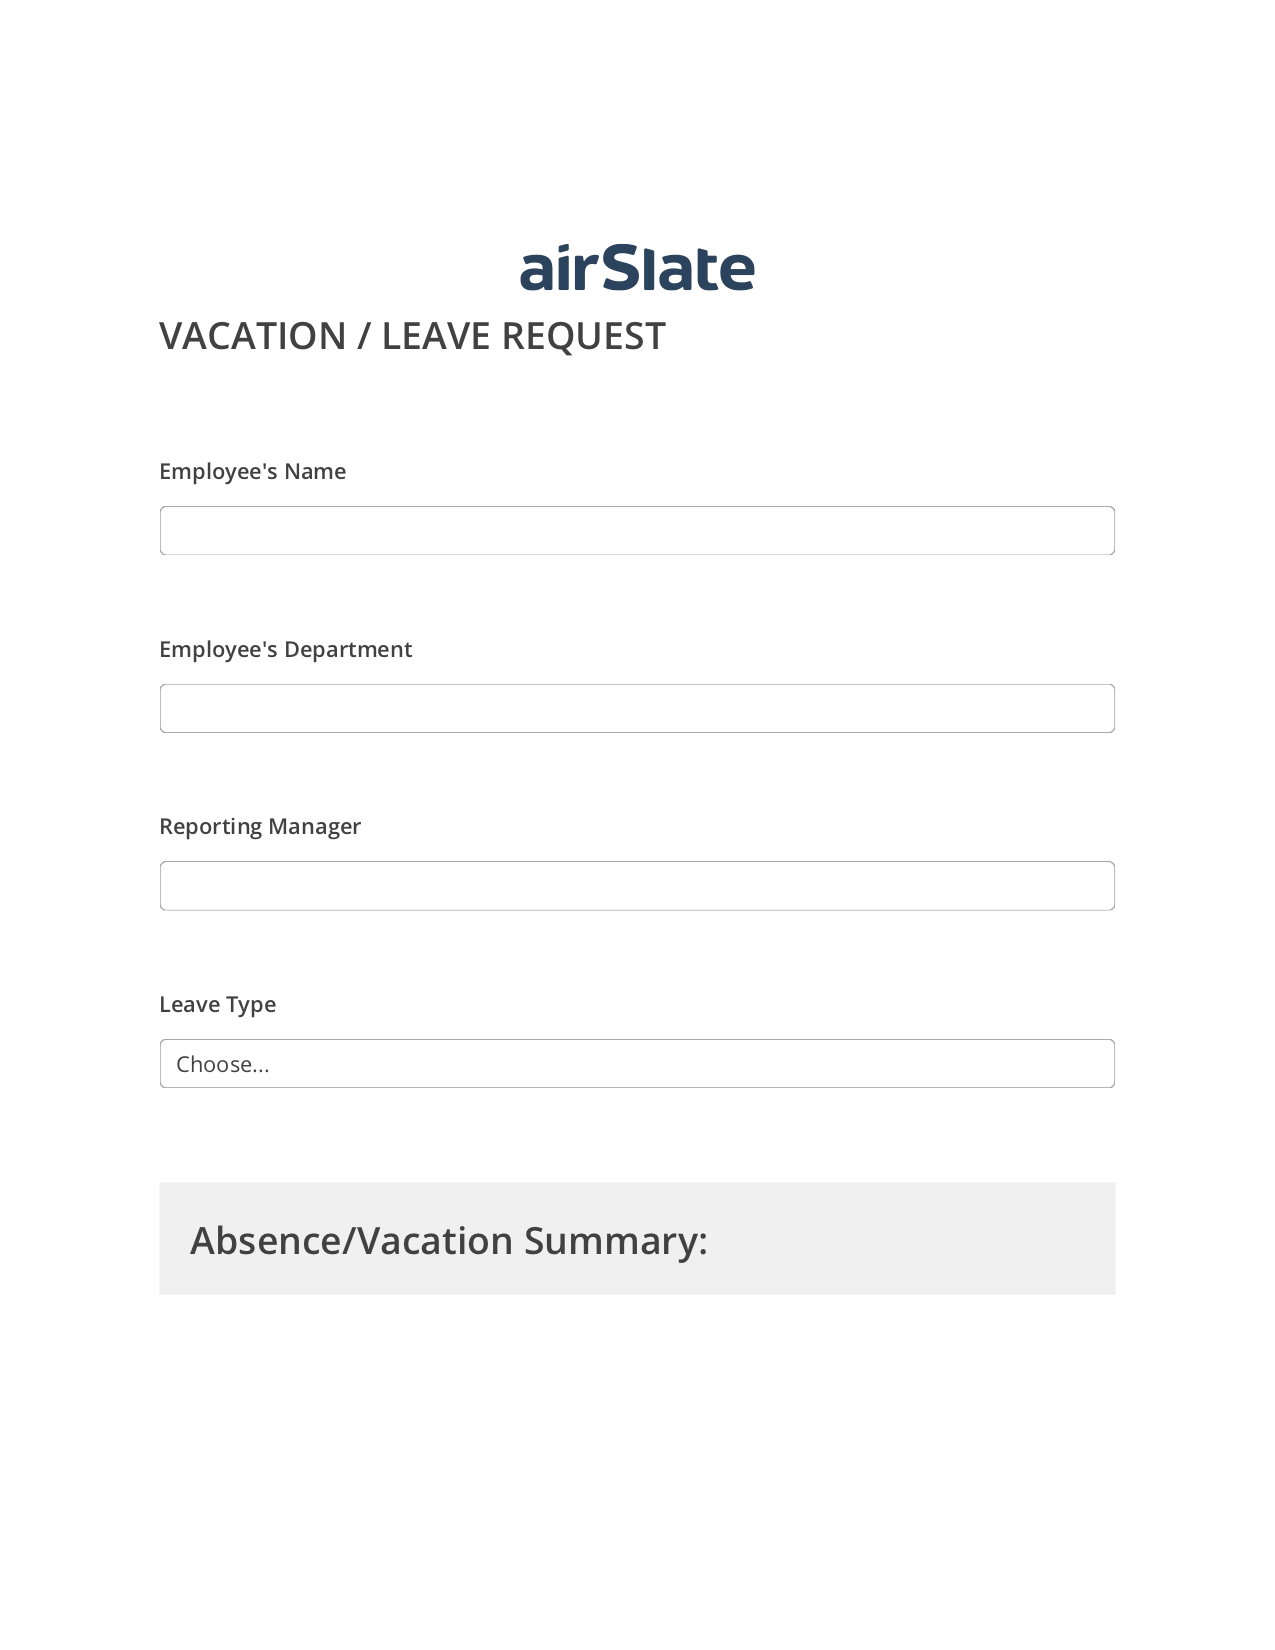 Vacation/Leave Request Flow MS Teams Notification upon Opening Bot